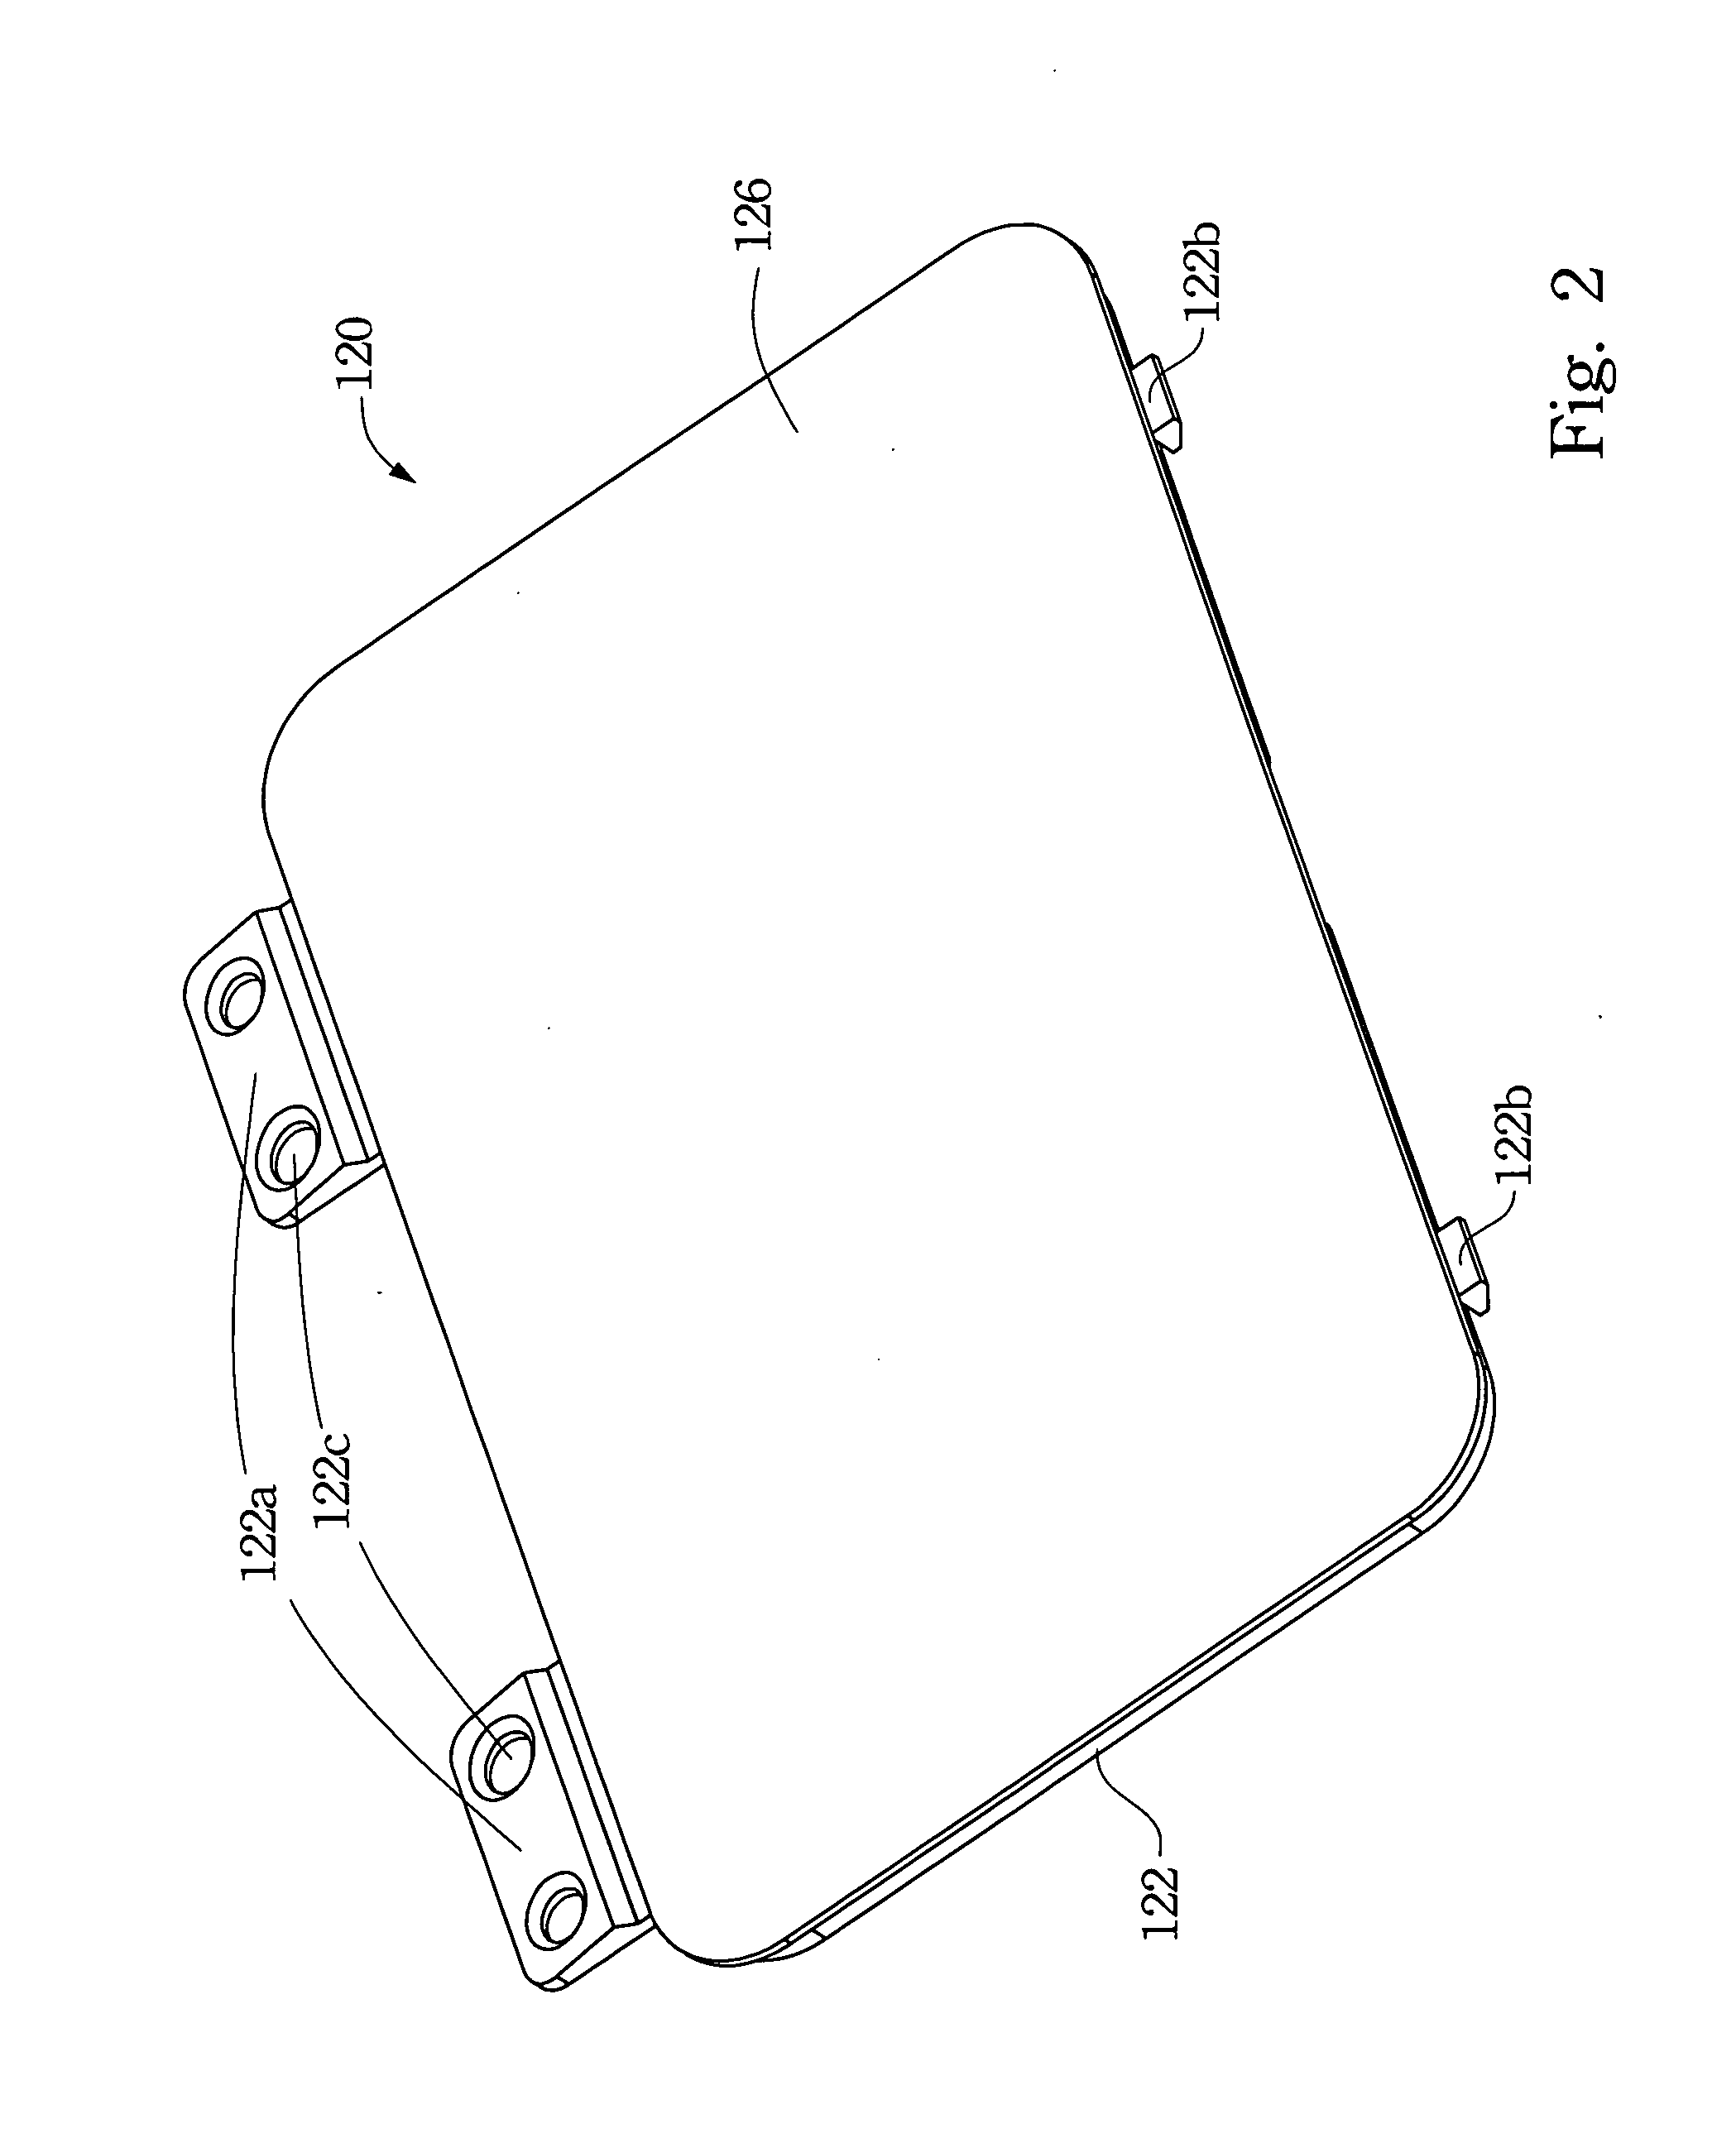 Touch pad module assembly structure